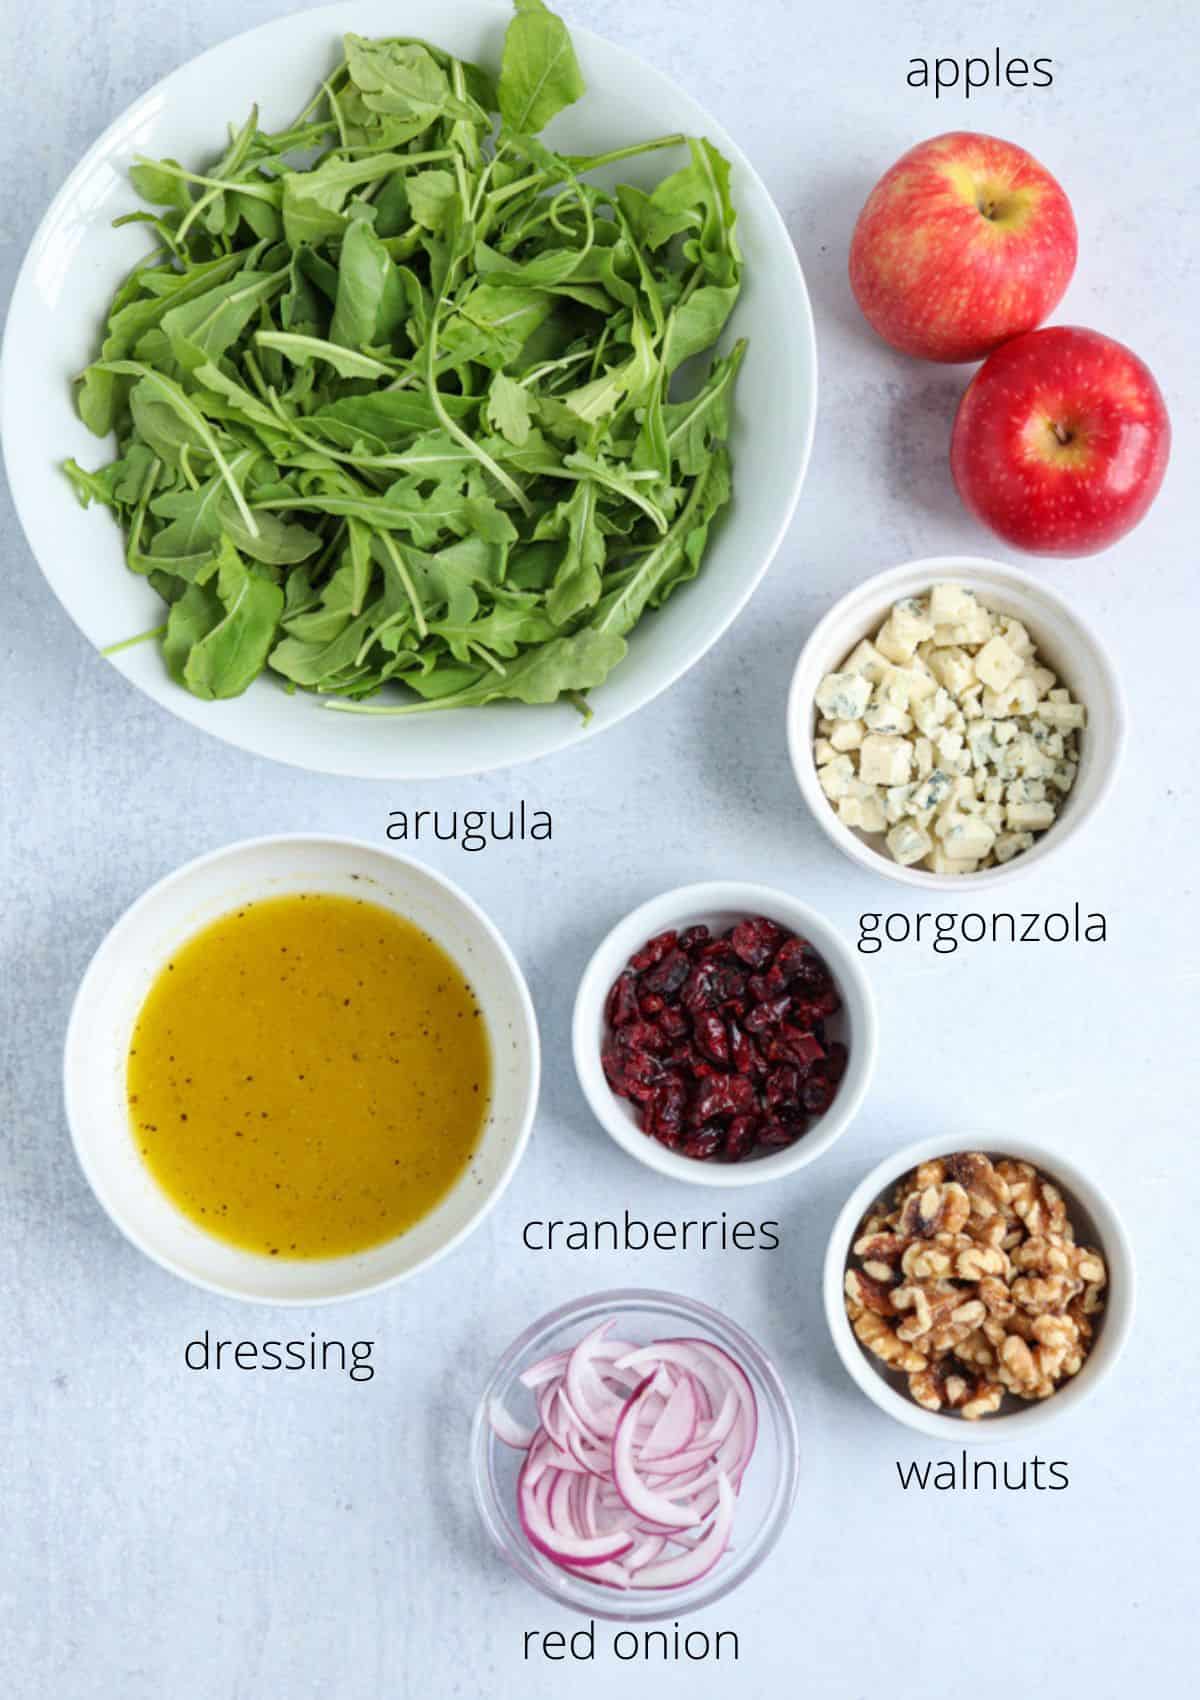 ingredients for making apple gorgonzola salad in small containers on light gray background.